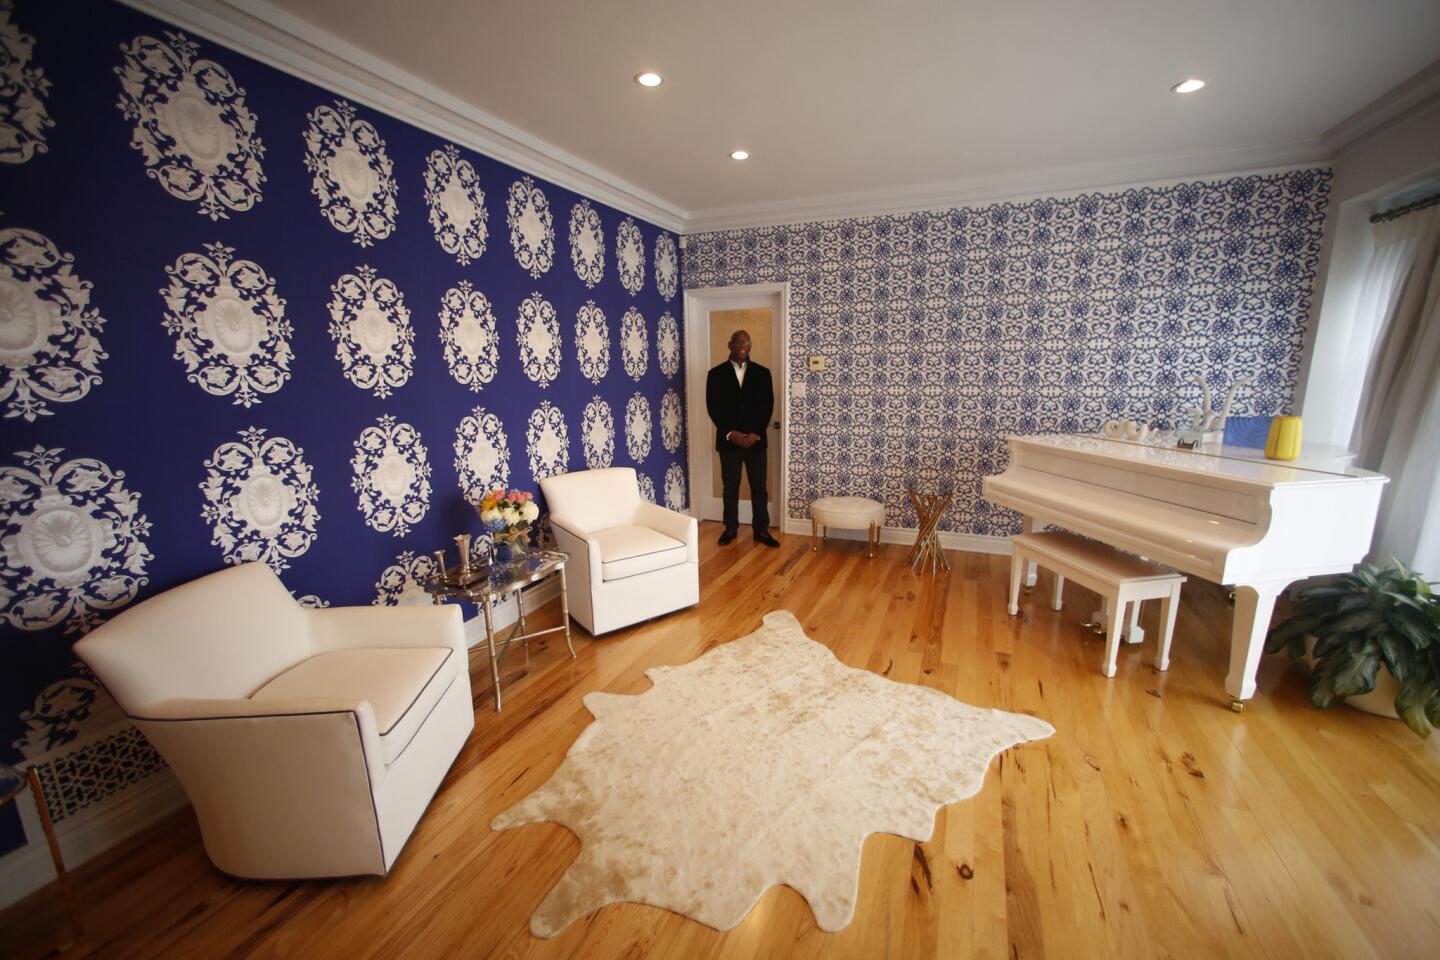 Thurmond stands in his living room, which includes two contrasting yet compatible wallpaper designs